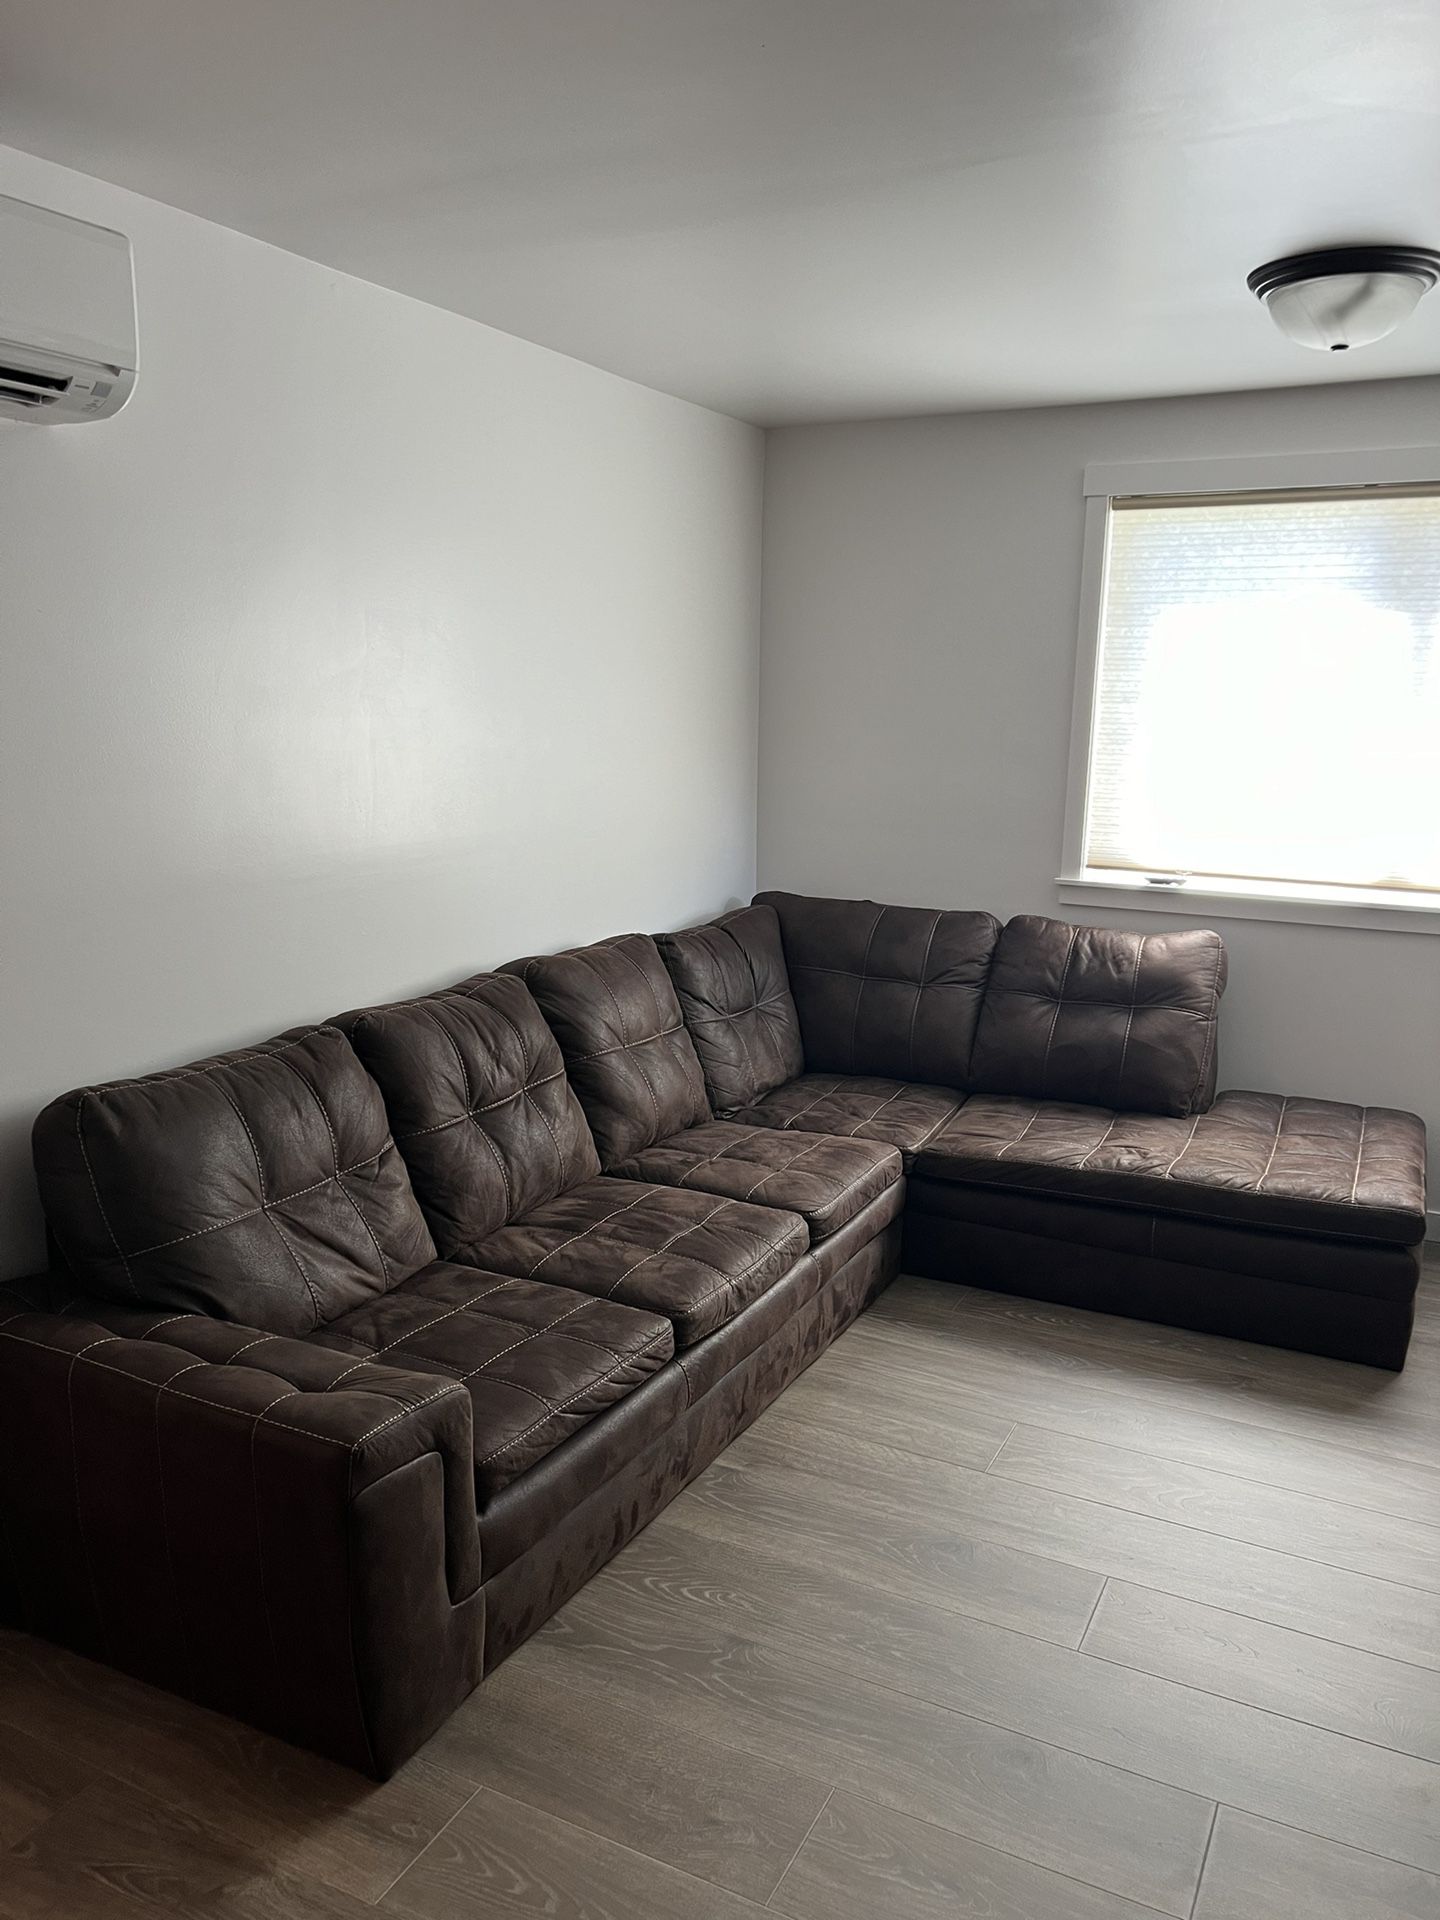 Great sofa for sale.  $250 OBO